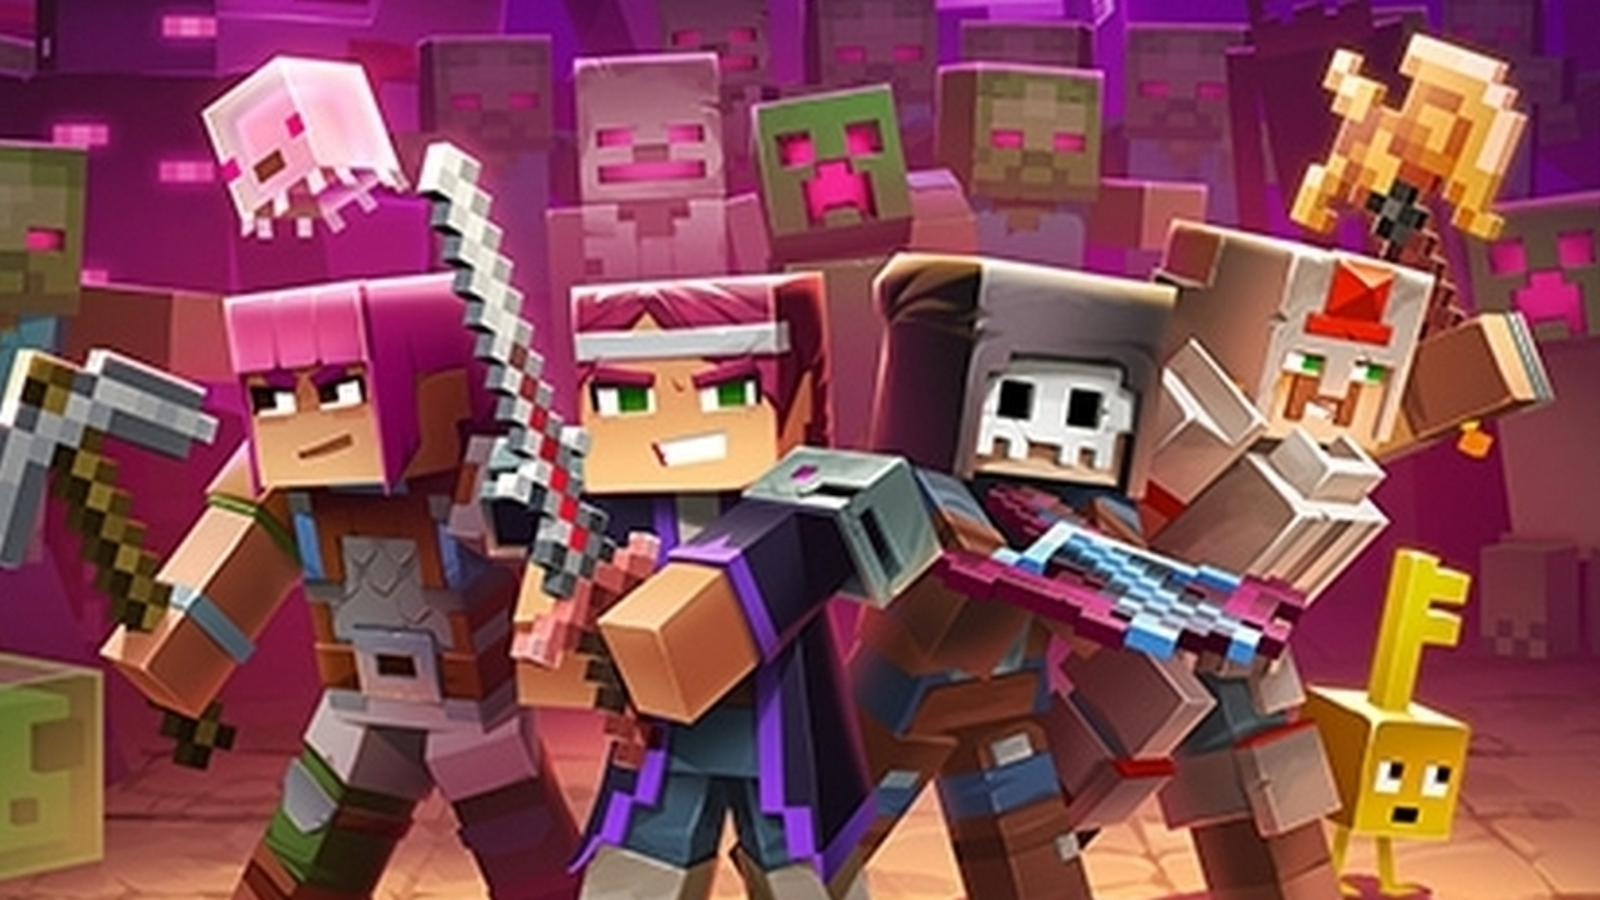 Minecraft: Story Mode - Season 2's Finale Dated With Trailer